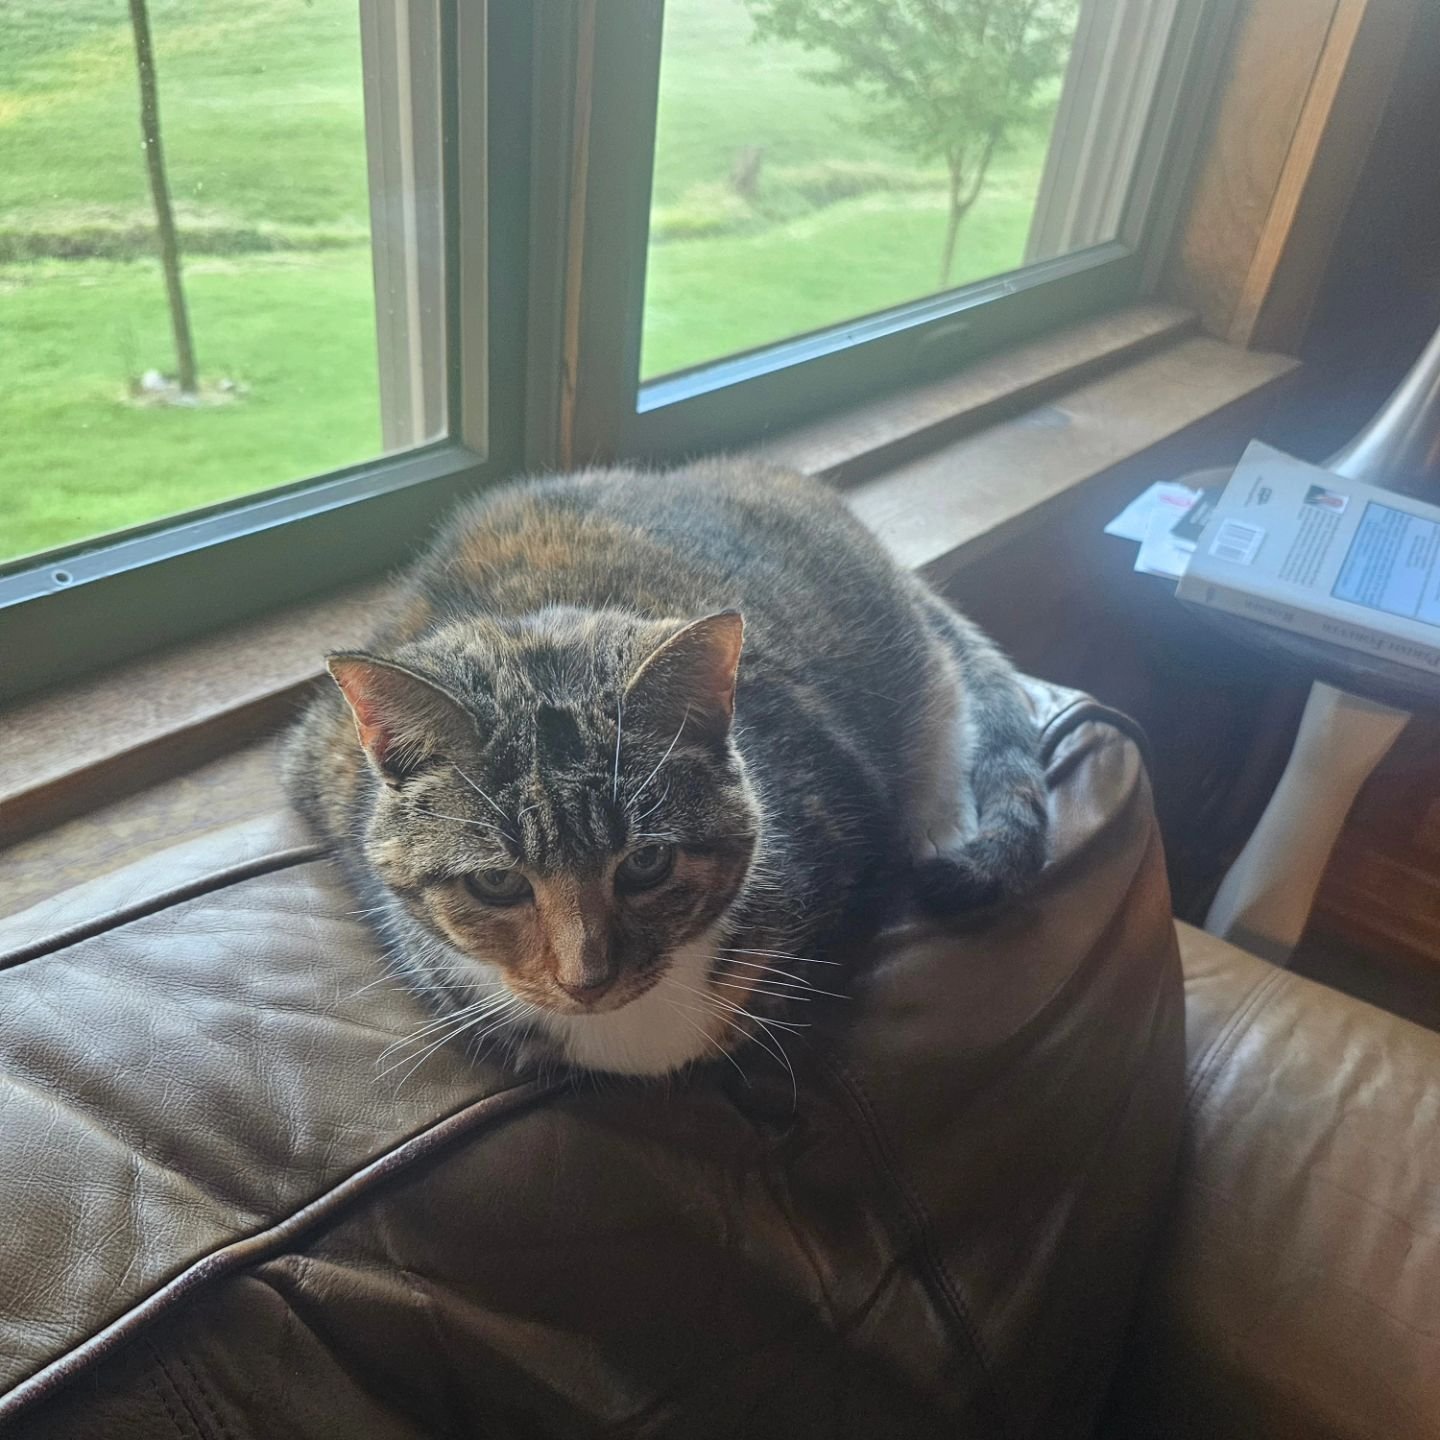 UPDATE! I have a home for the outside cat :-) I still need a home for my sweet, loving inside cat, Lilly.  She is very calm, doesn't scratch on anything, uses litter box and just wants to be around her people.  PLEASE if you have room in your life fo